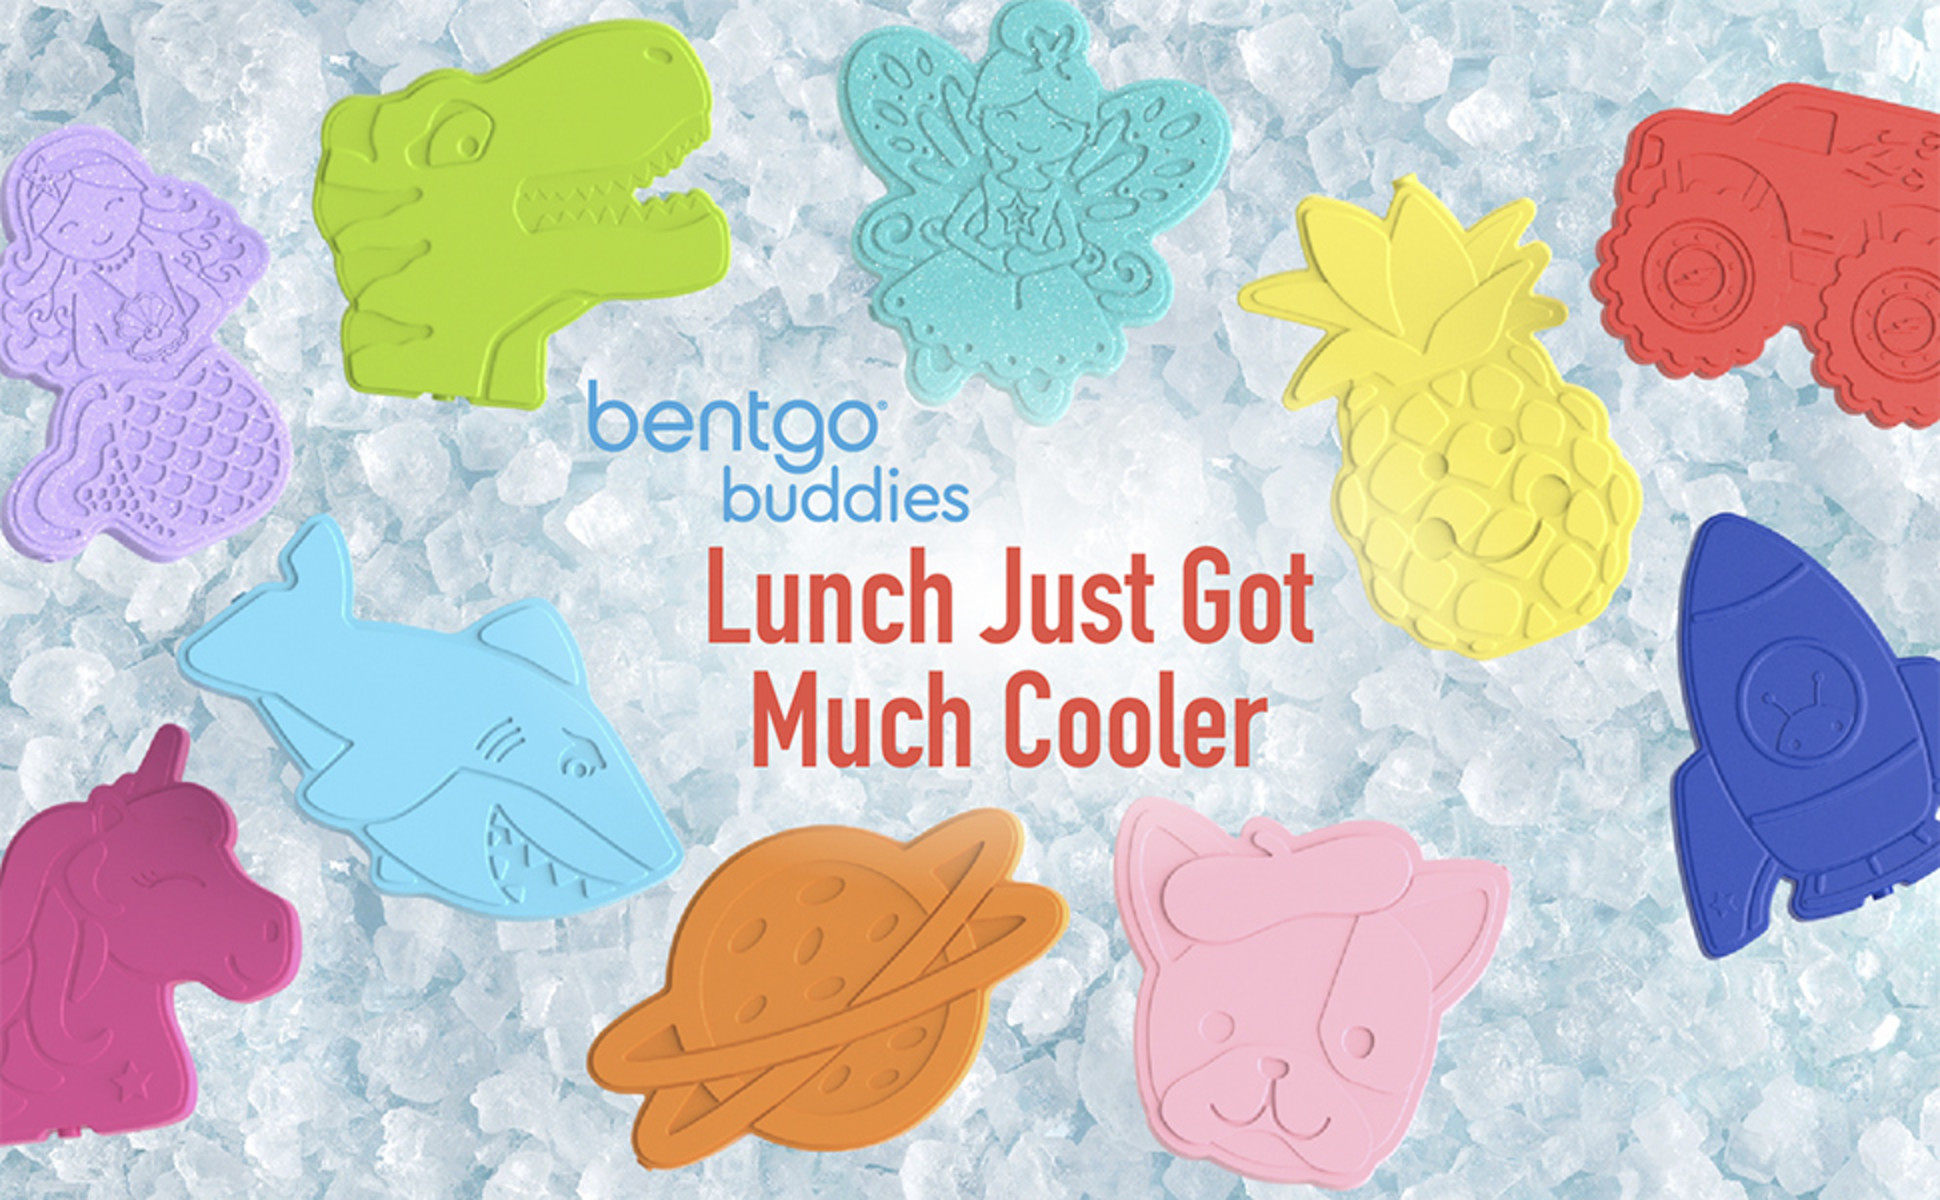 Bentgo Buddies Glitter Reusable Ice Packs ,Slim for Lunch Boxes / Bags, and Coolers - Multicolored 4-Pack (Mermaid)